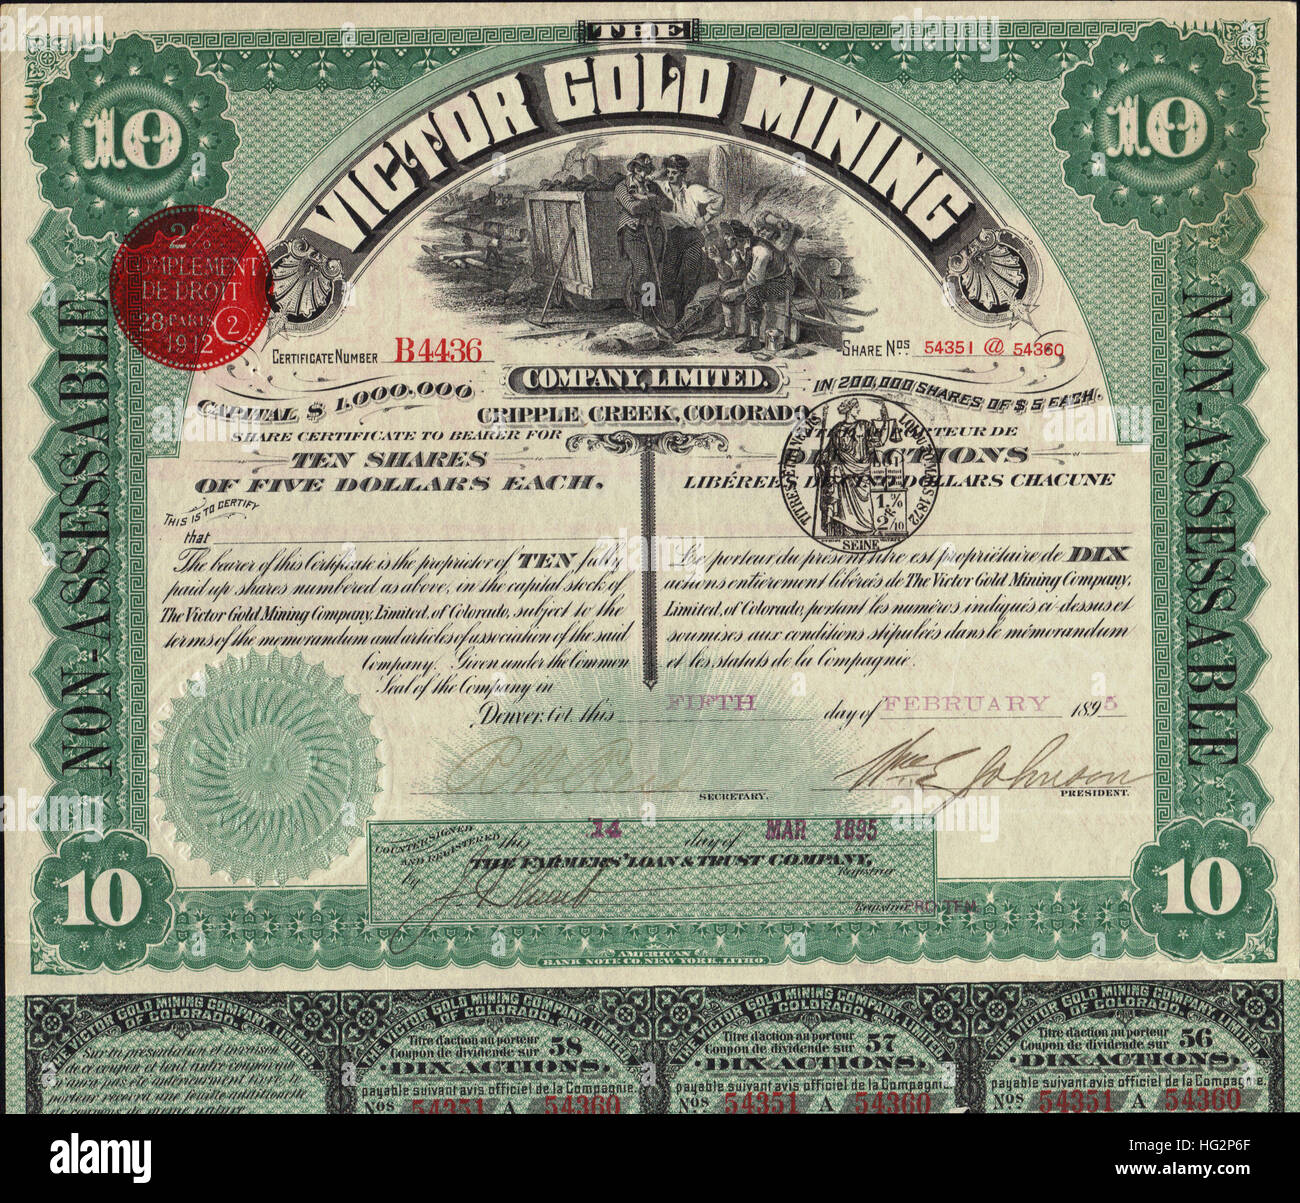 1895 Victor Gold Mining Company Limited Stock Certificate - Bull Hill - Cripple Creek District, Colorado - USA Stock Photo